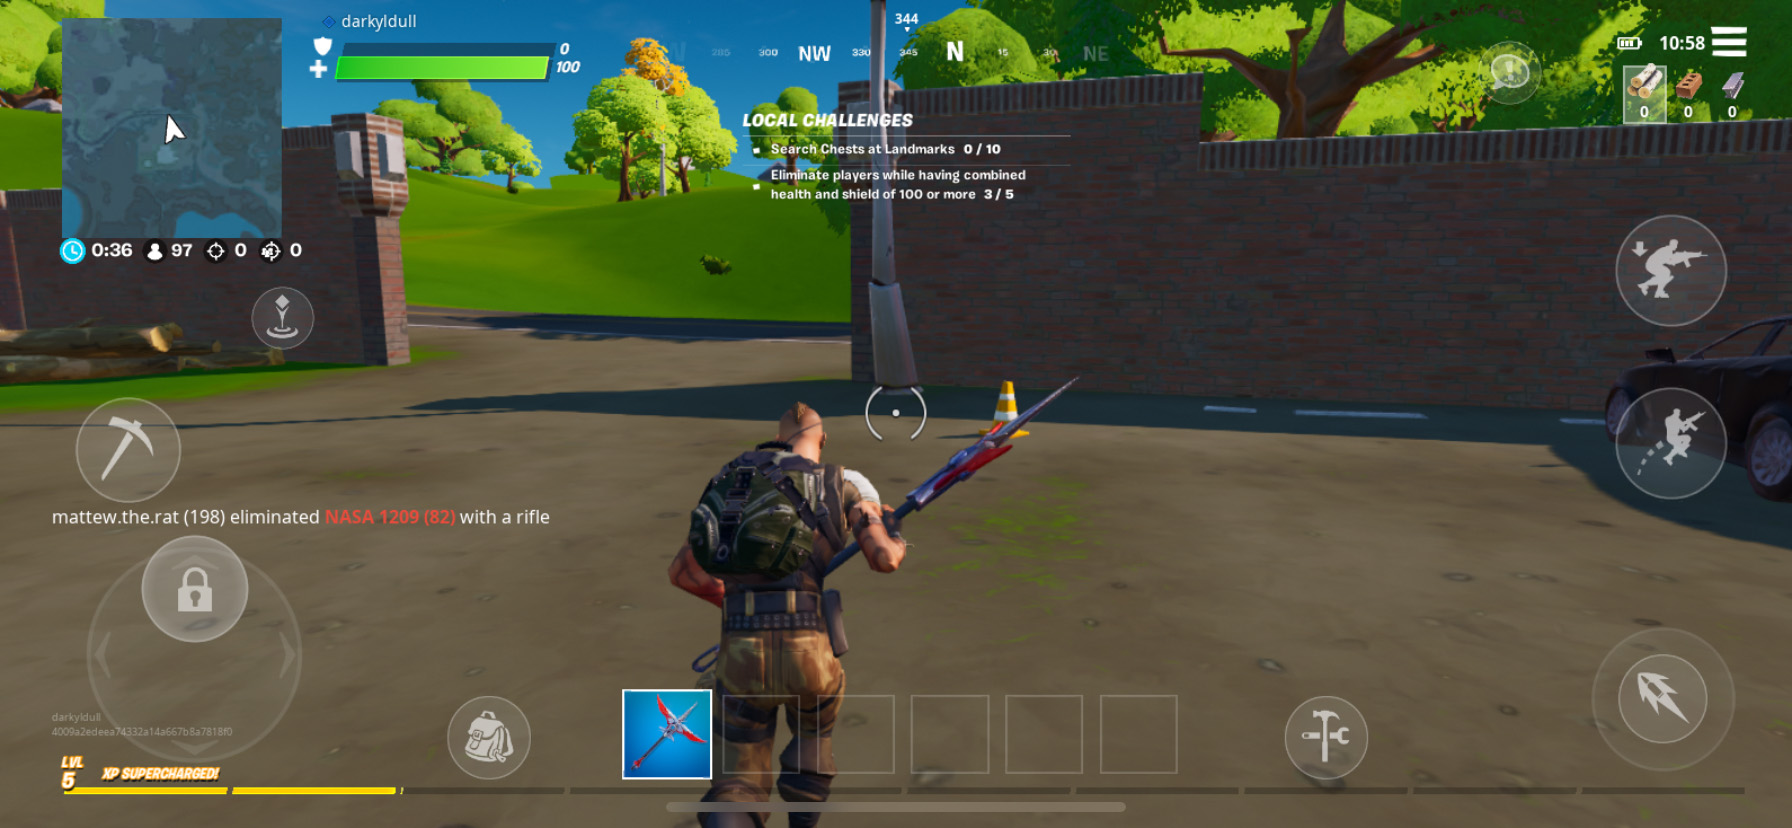 Playing Fortnite On Bluestacks Fortnite Mobile Bluestacks The Best Android Emulator On Pc As Rated By You